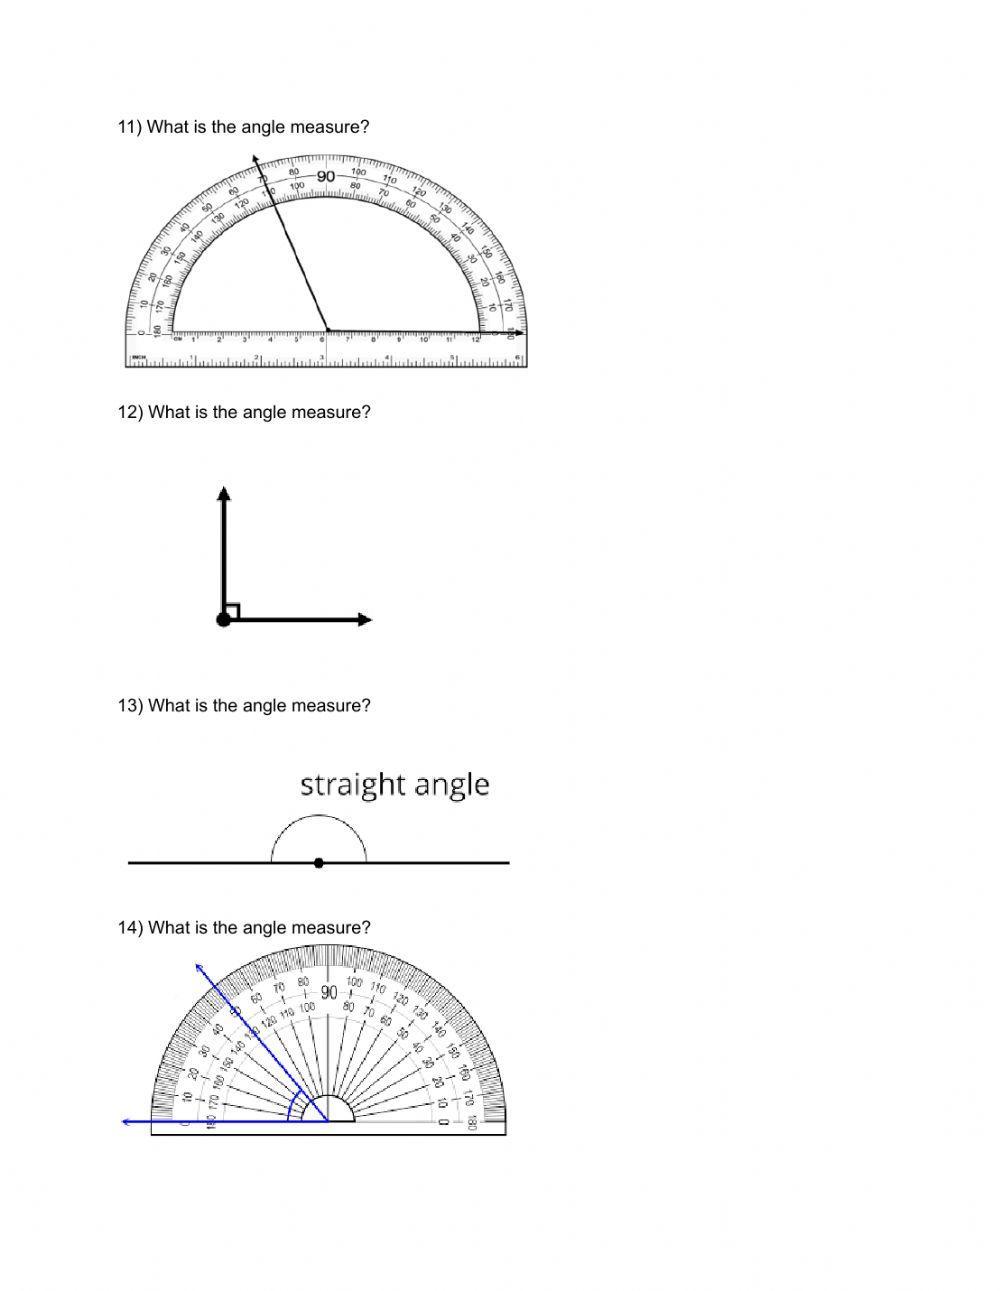 Classifying Angles